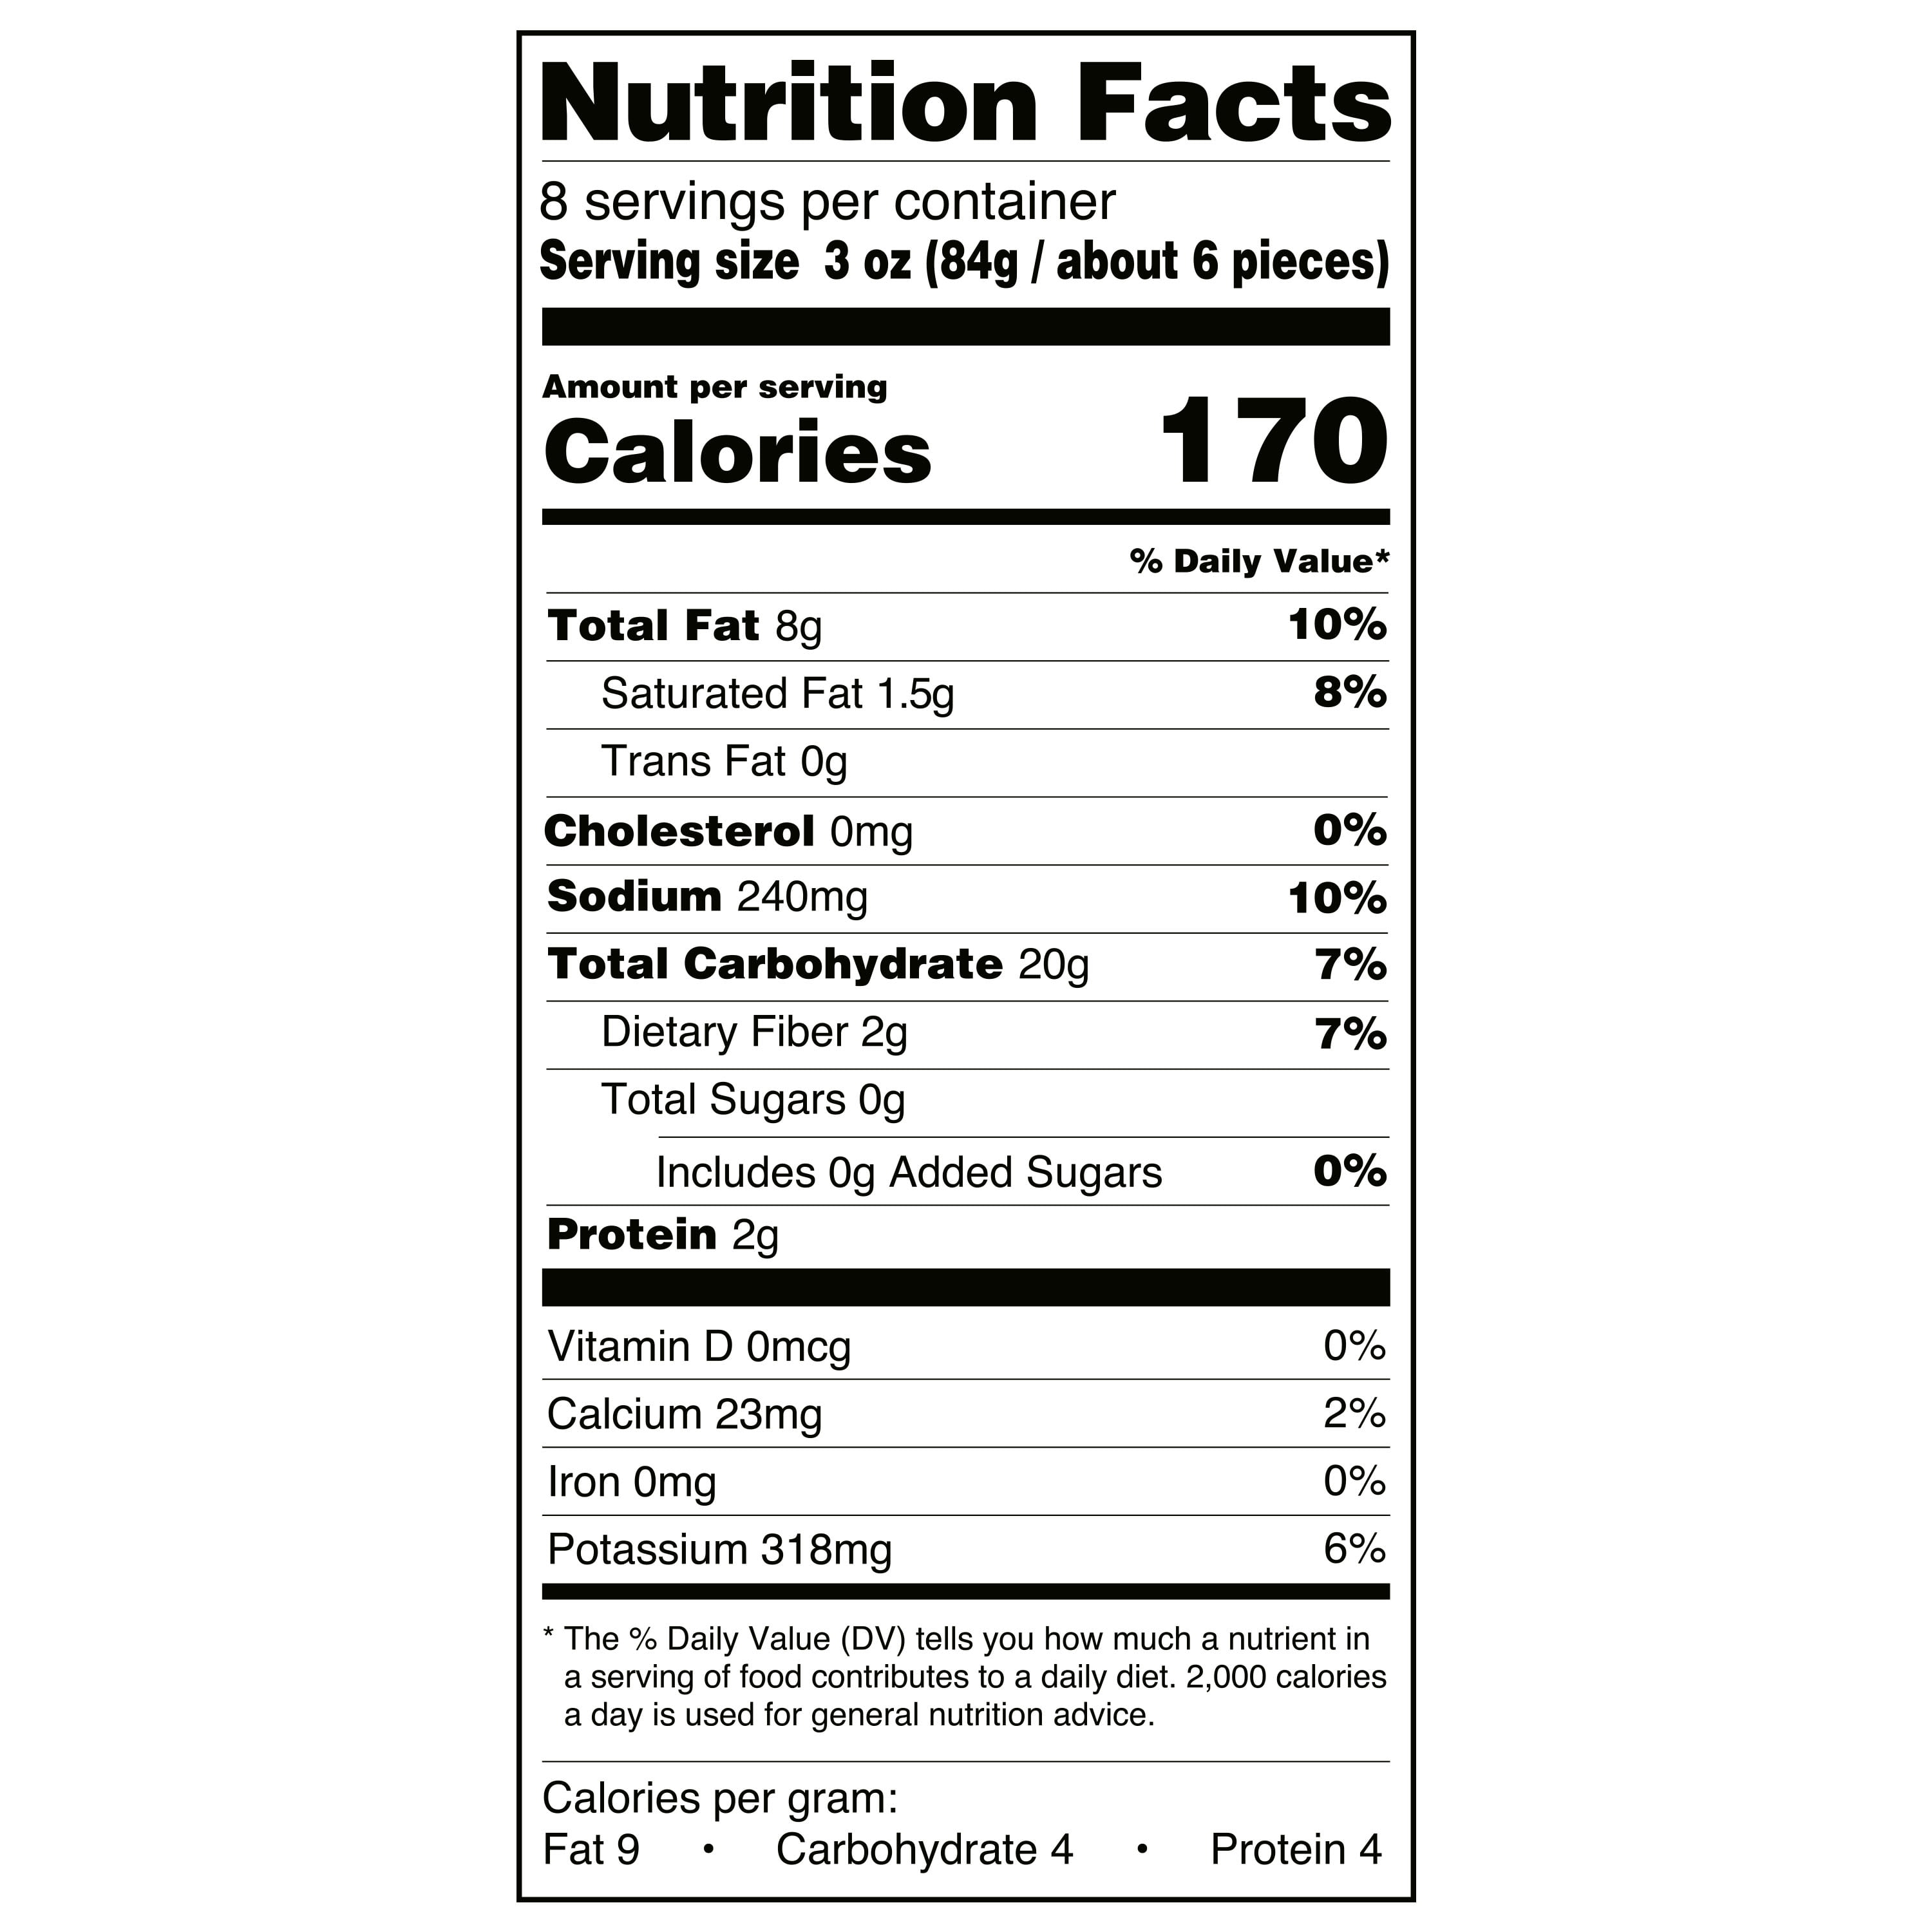 Chick Fil A Nutrition Info Facts And Calories 2017.